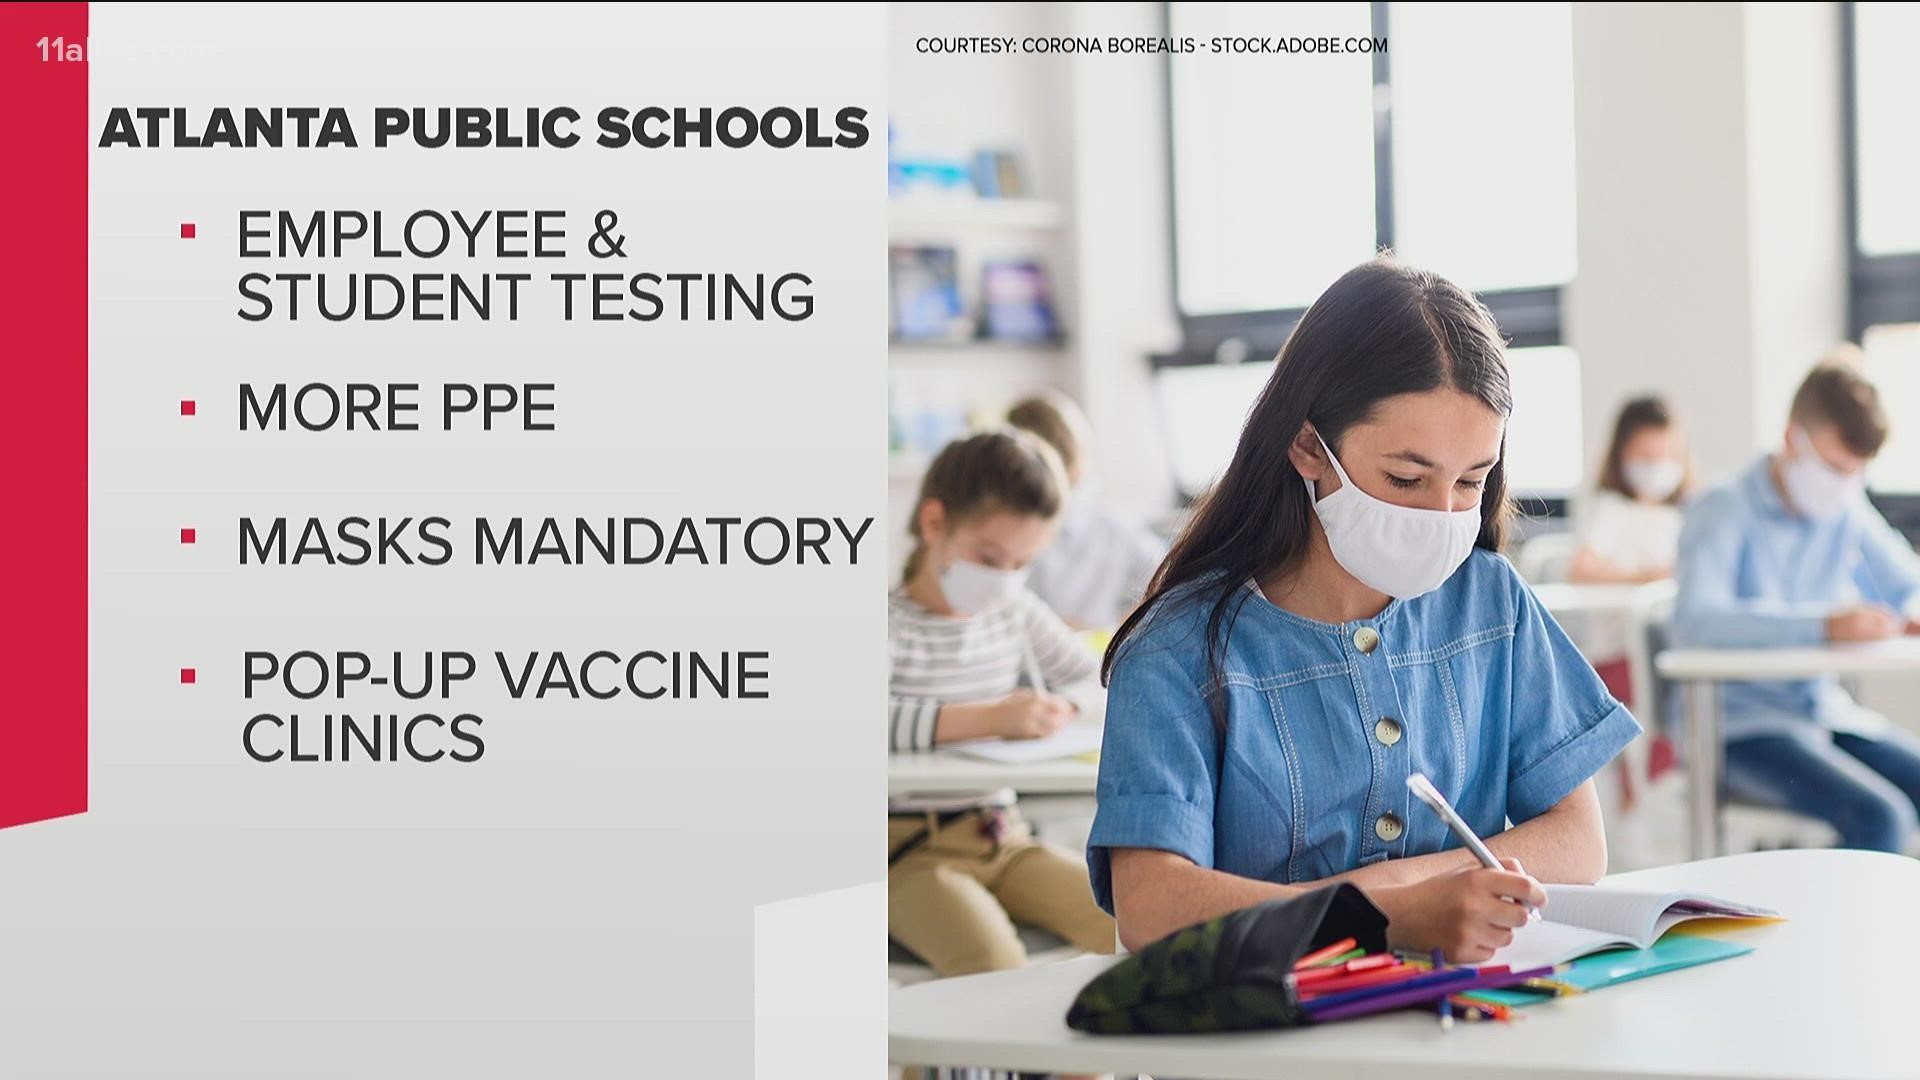 Virus testing, more personal protective equipment and pop-up vaccine clinics will be available throughout the district, officials say.